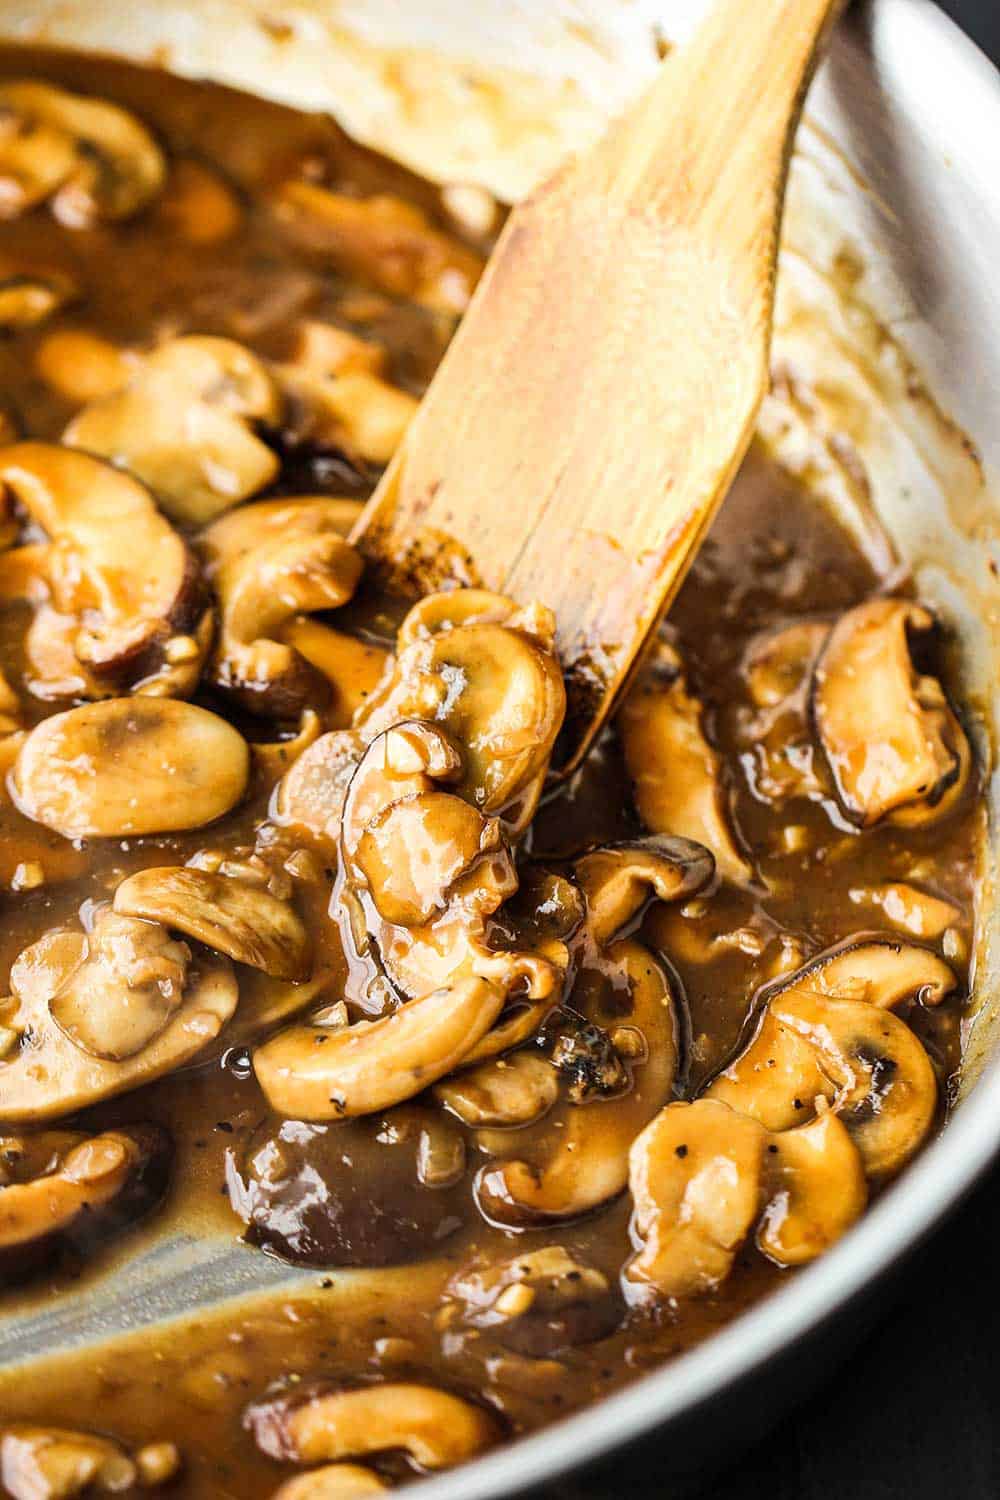 A stainless steel skillet filled with a marsala sauce and sliced mushrooms with a wooden spatula off to the side.